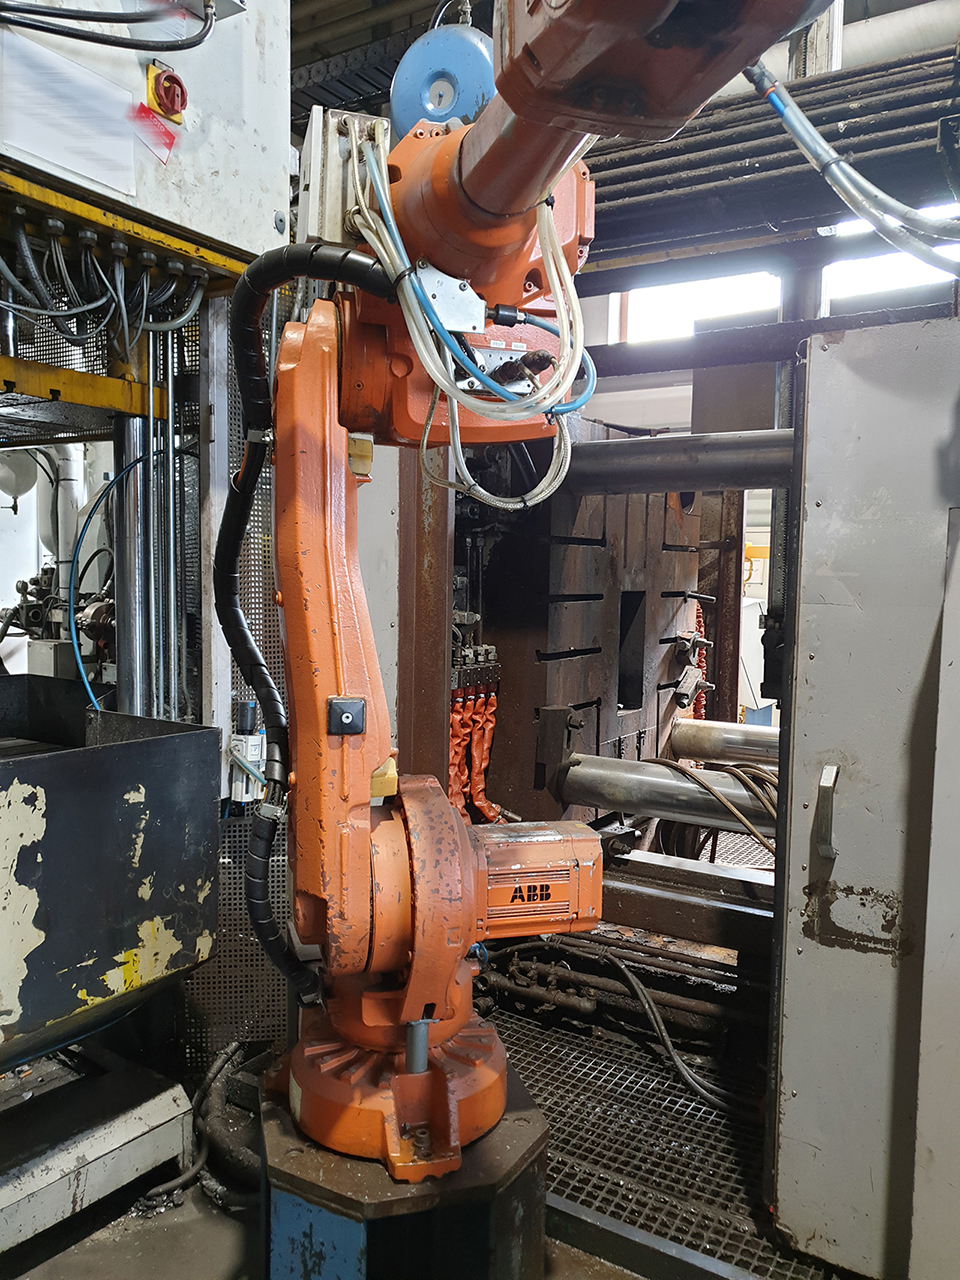 ABB IRB 4600 foundry robot HR1826, used